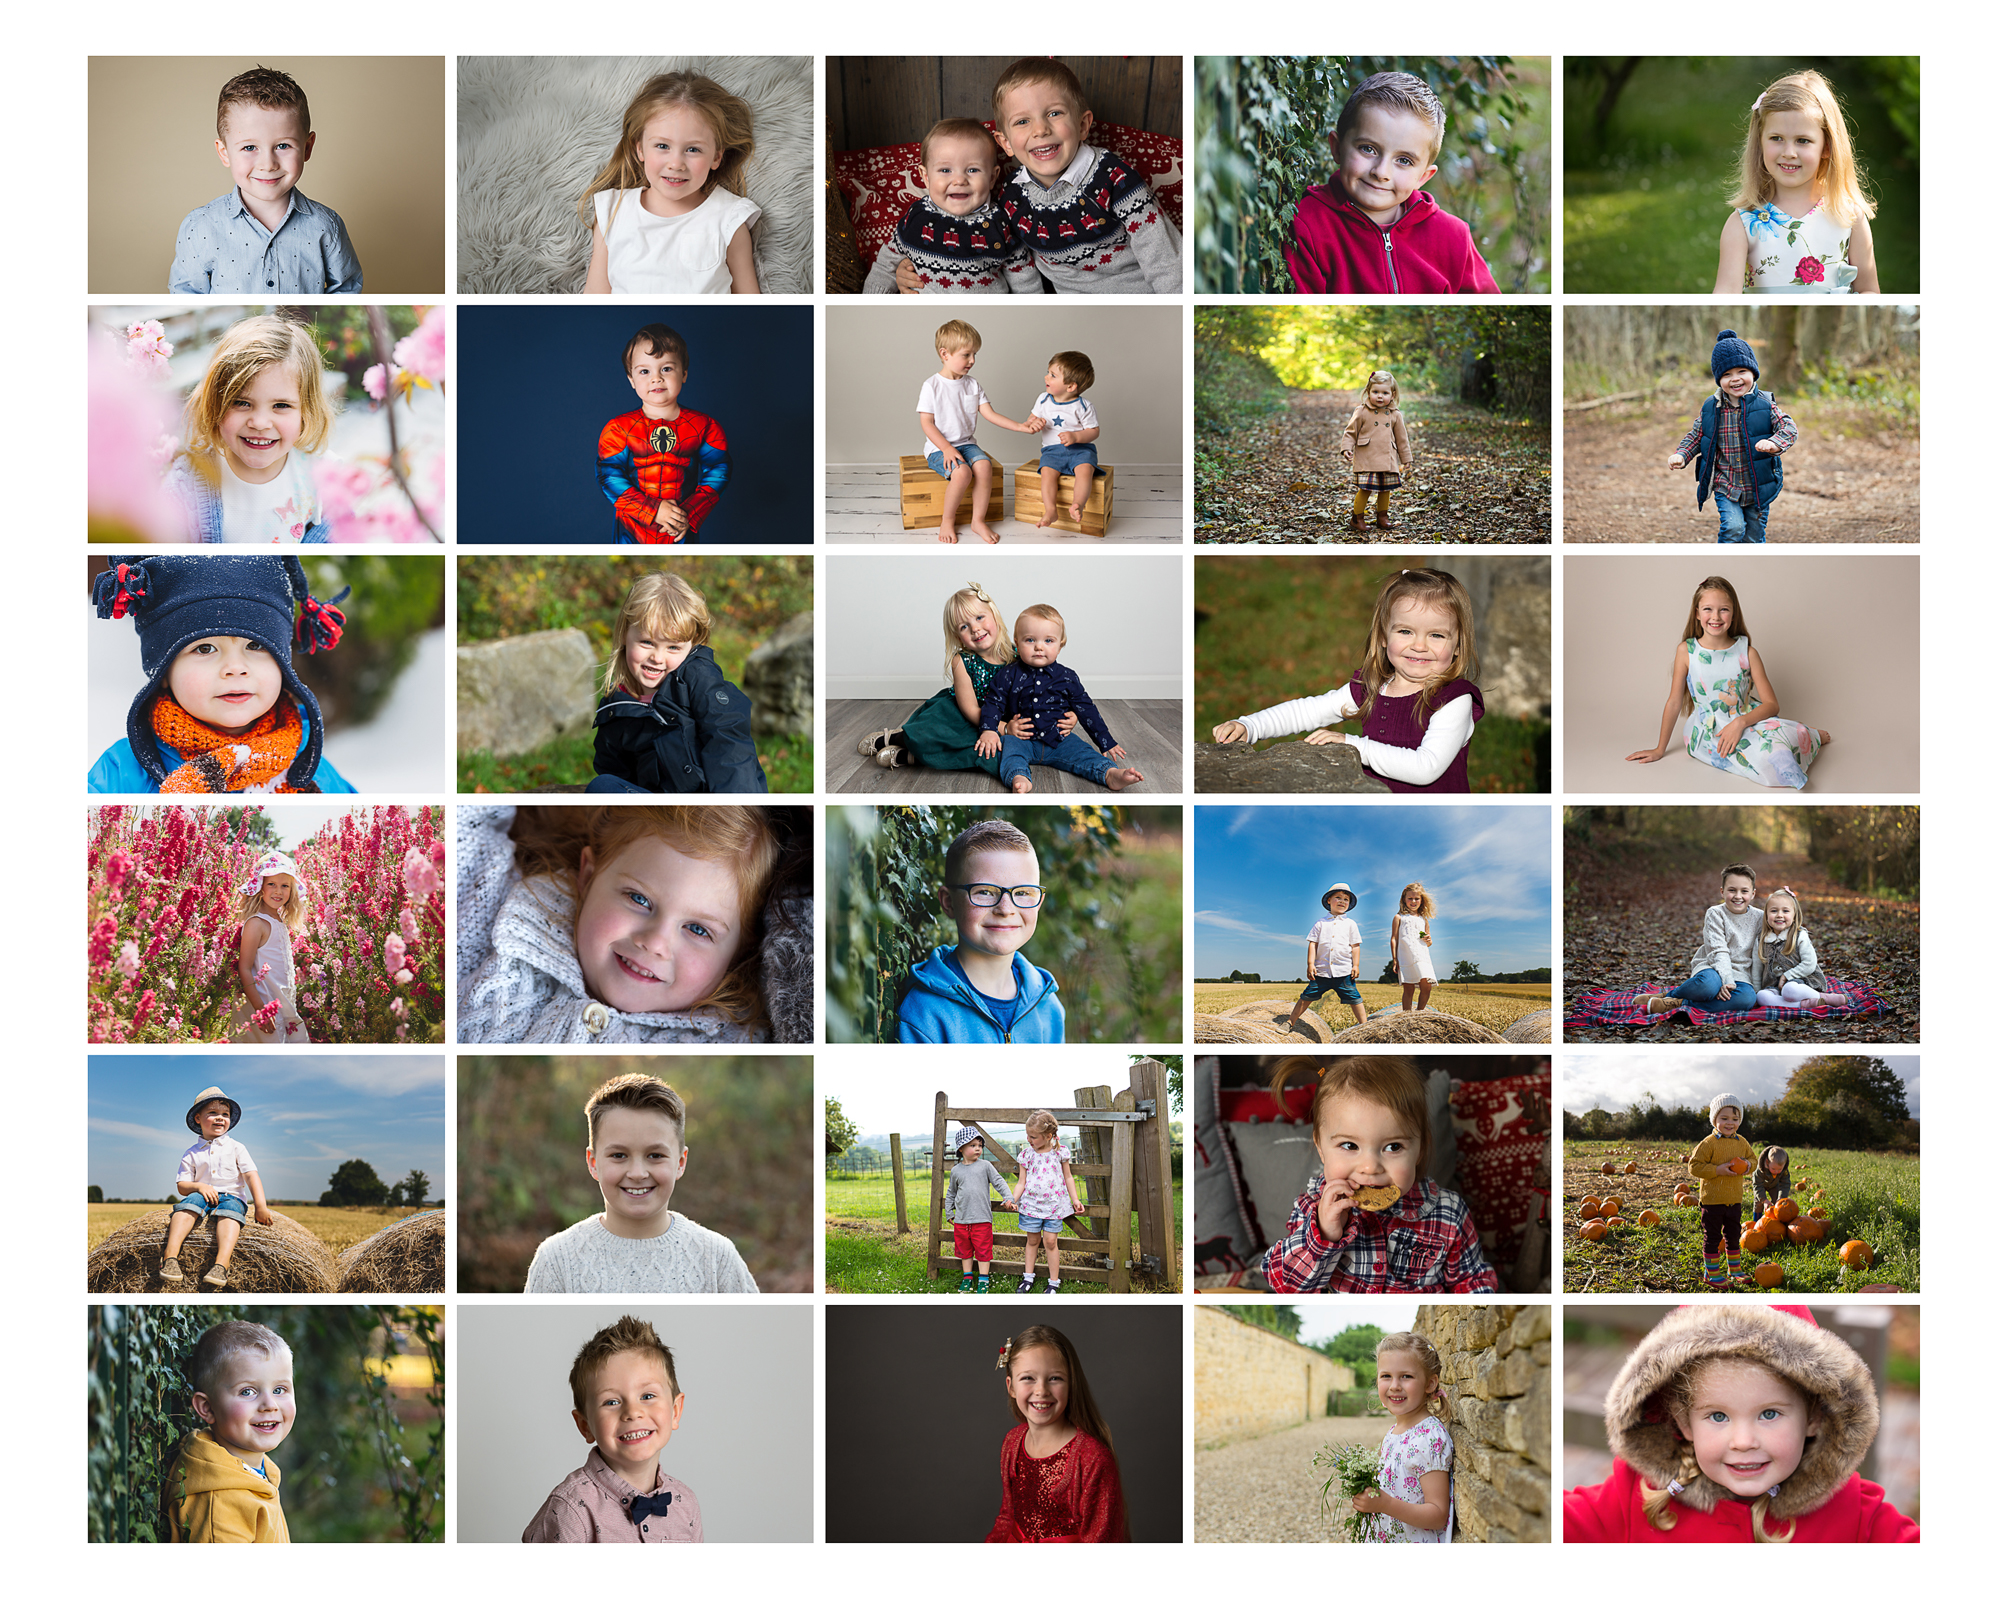 Family / Children's photographer South Wales near Cardiff, based in Caerphilly